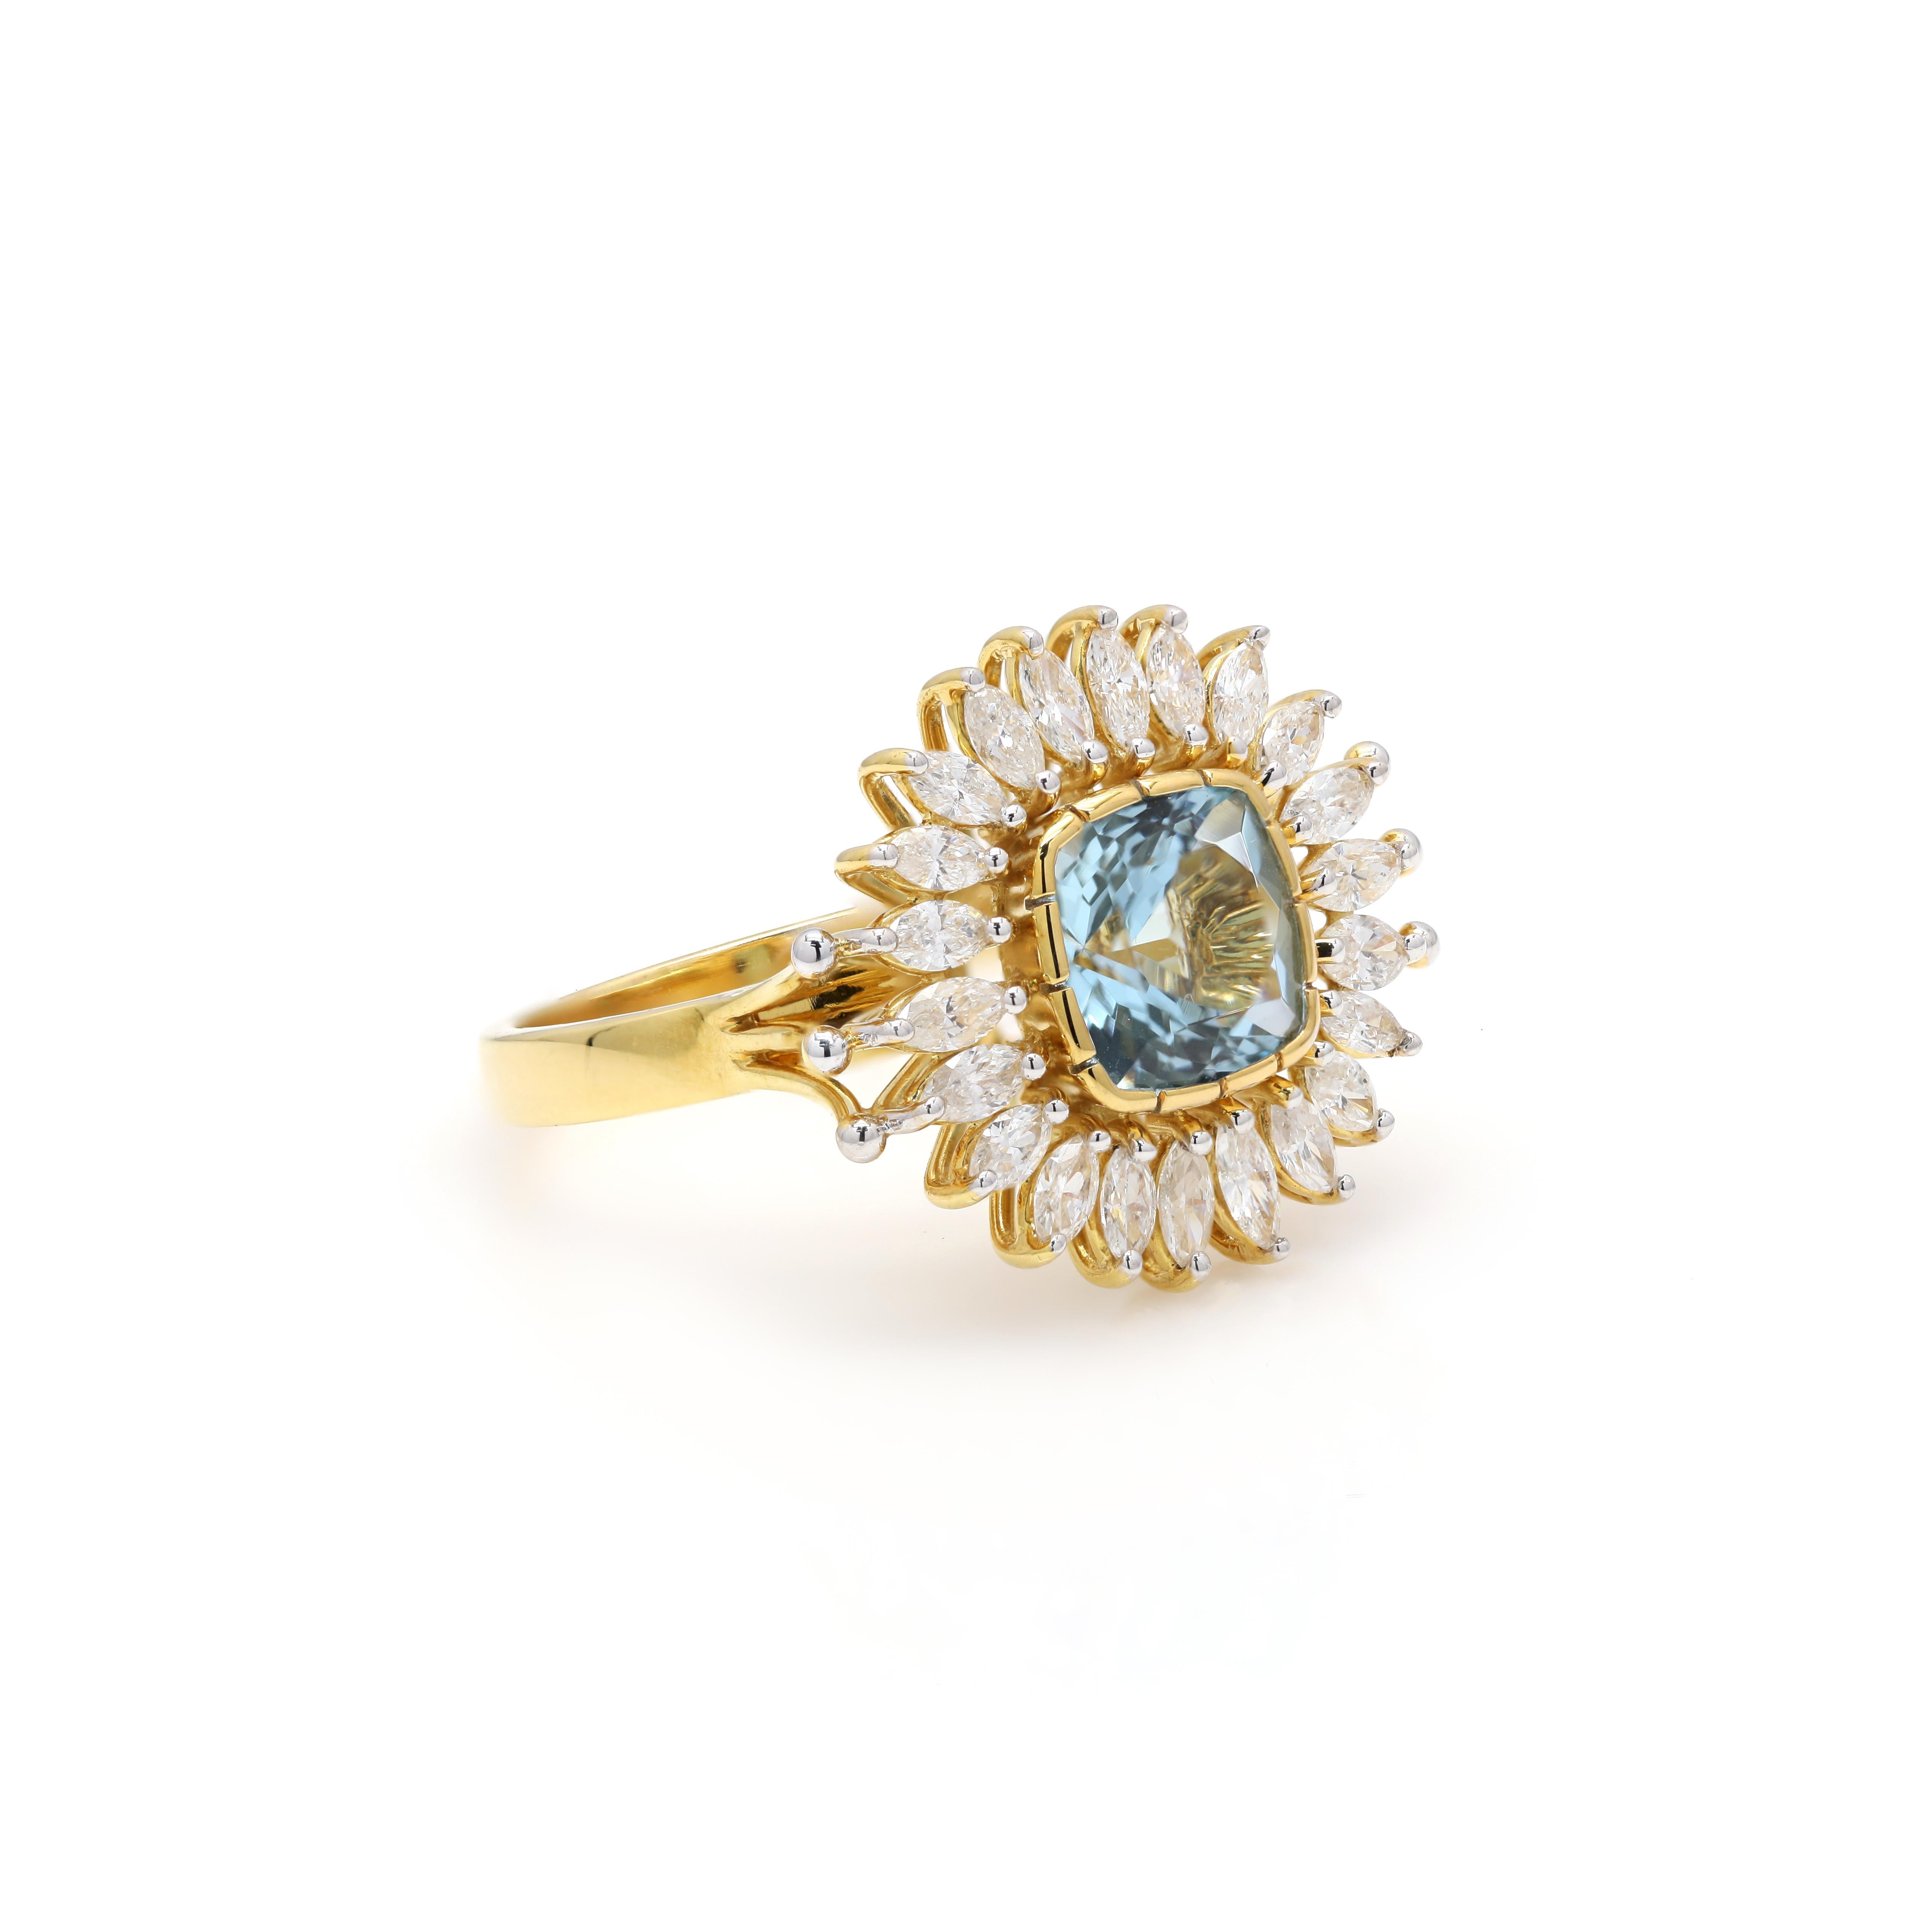 For Sale:   1.25 ct Diamond 3.6 ct Aquamarine Cocktail Ring in 18K Yellow Gold 2